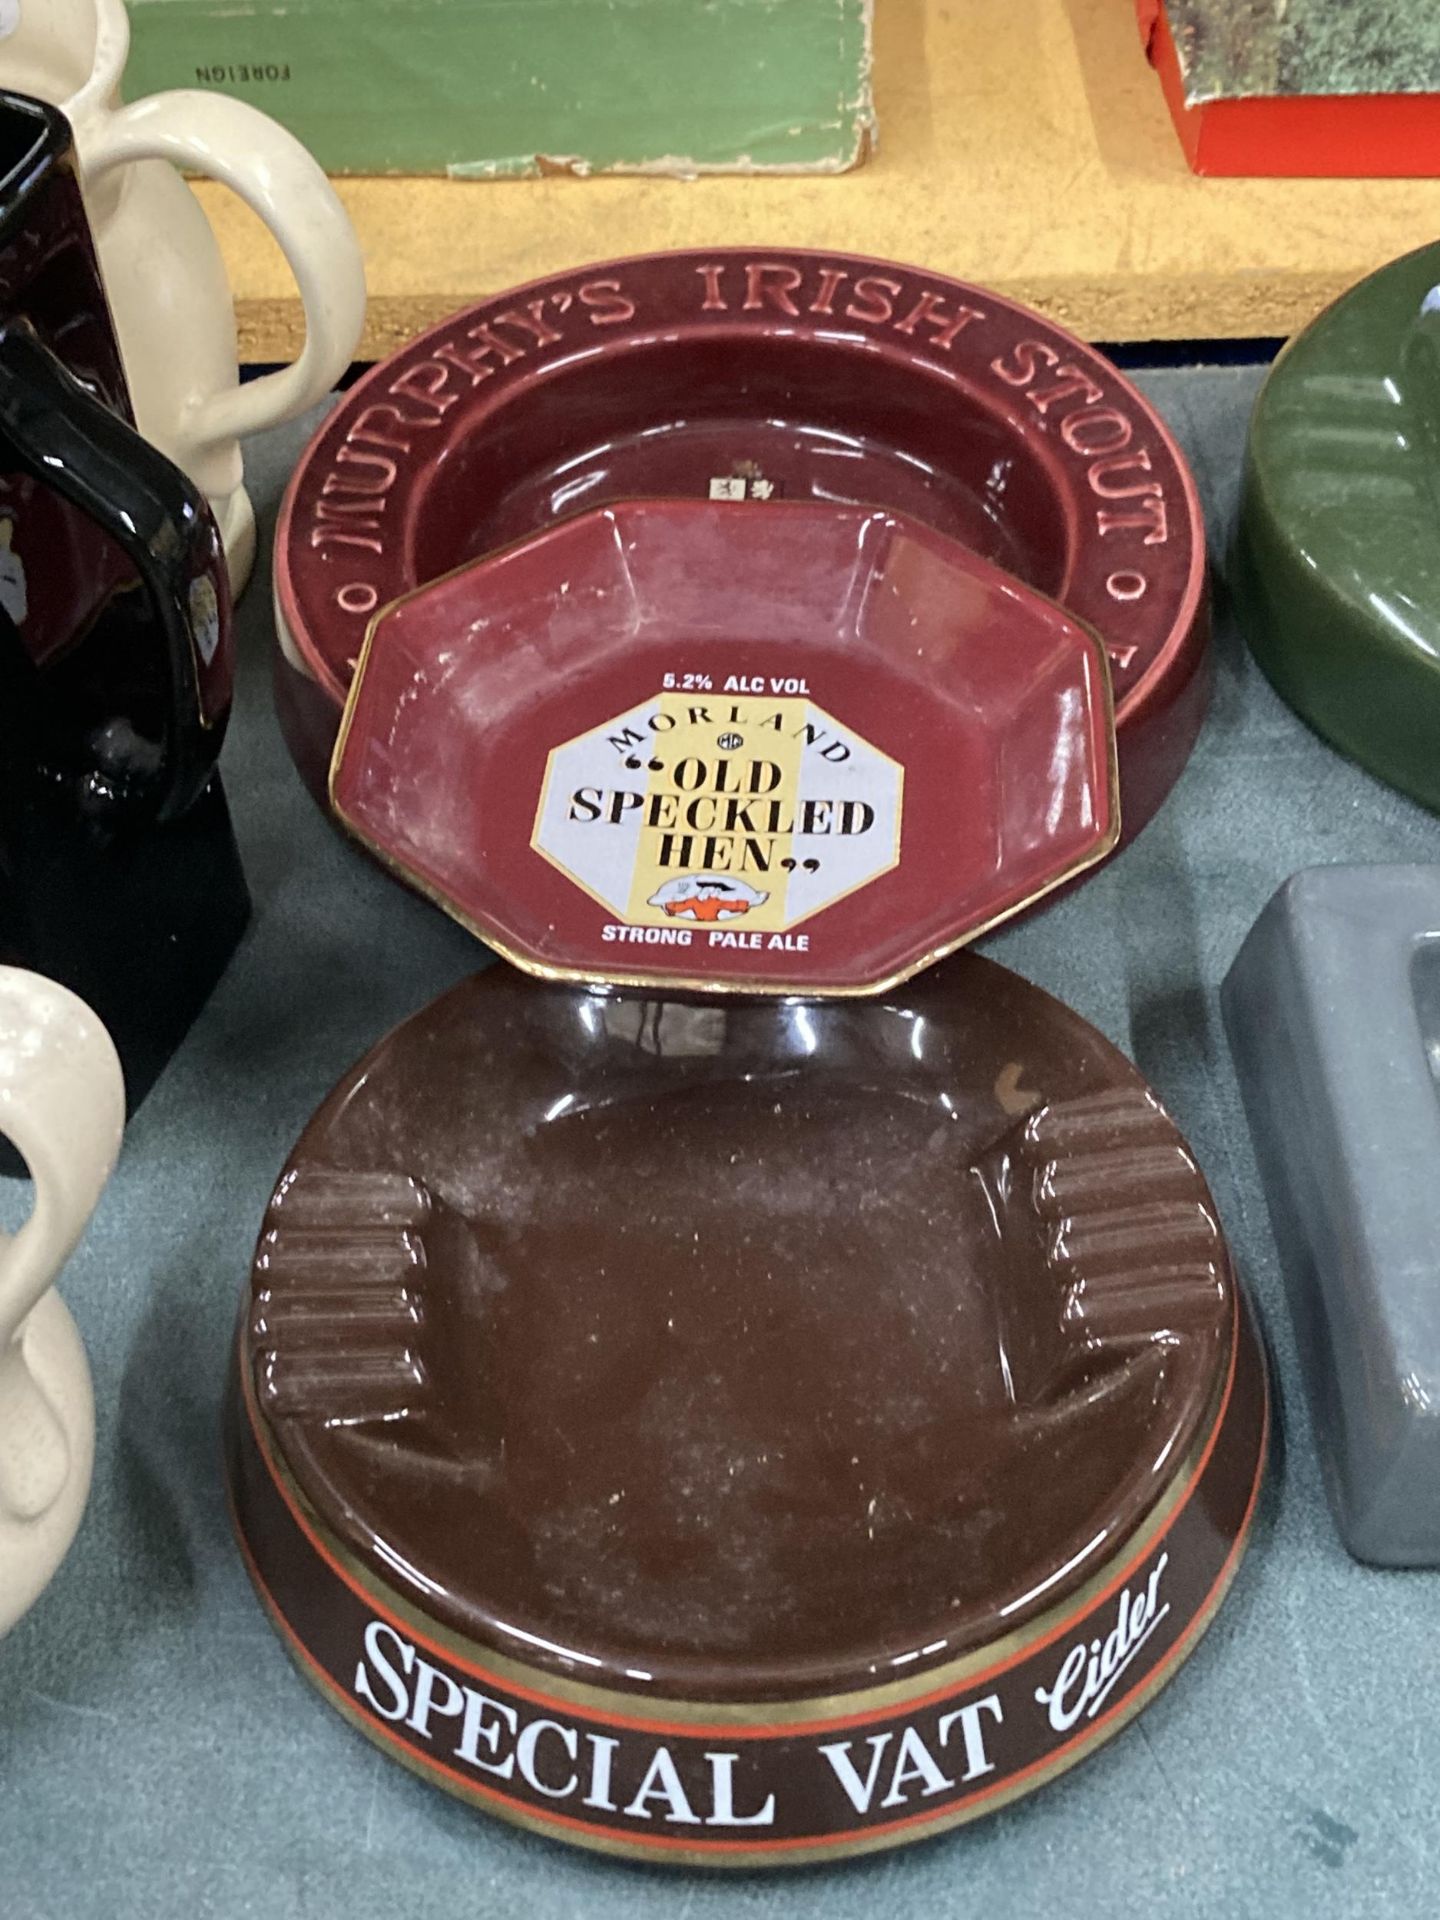 THREE CERAMIC ASHTRAYS TO INCLUDE OLD SPECKLED HEN, MURPHY'S AND SPECIAL VAT CIDER